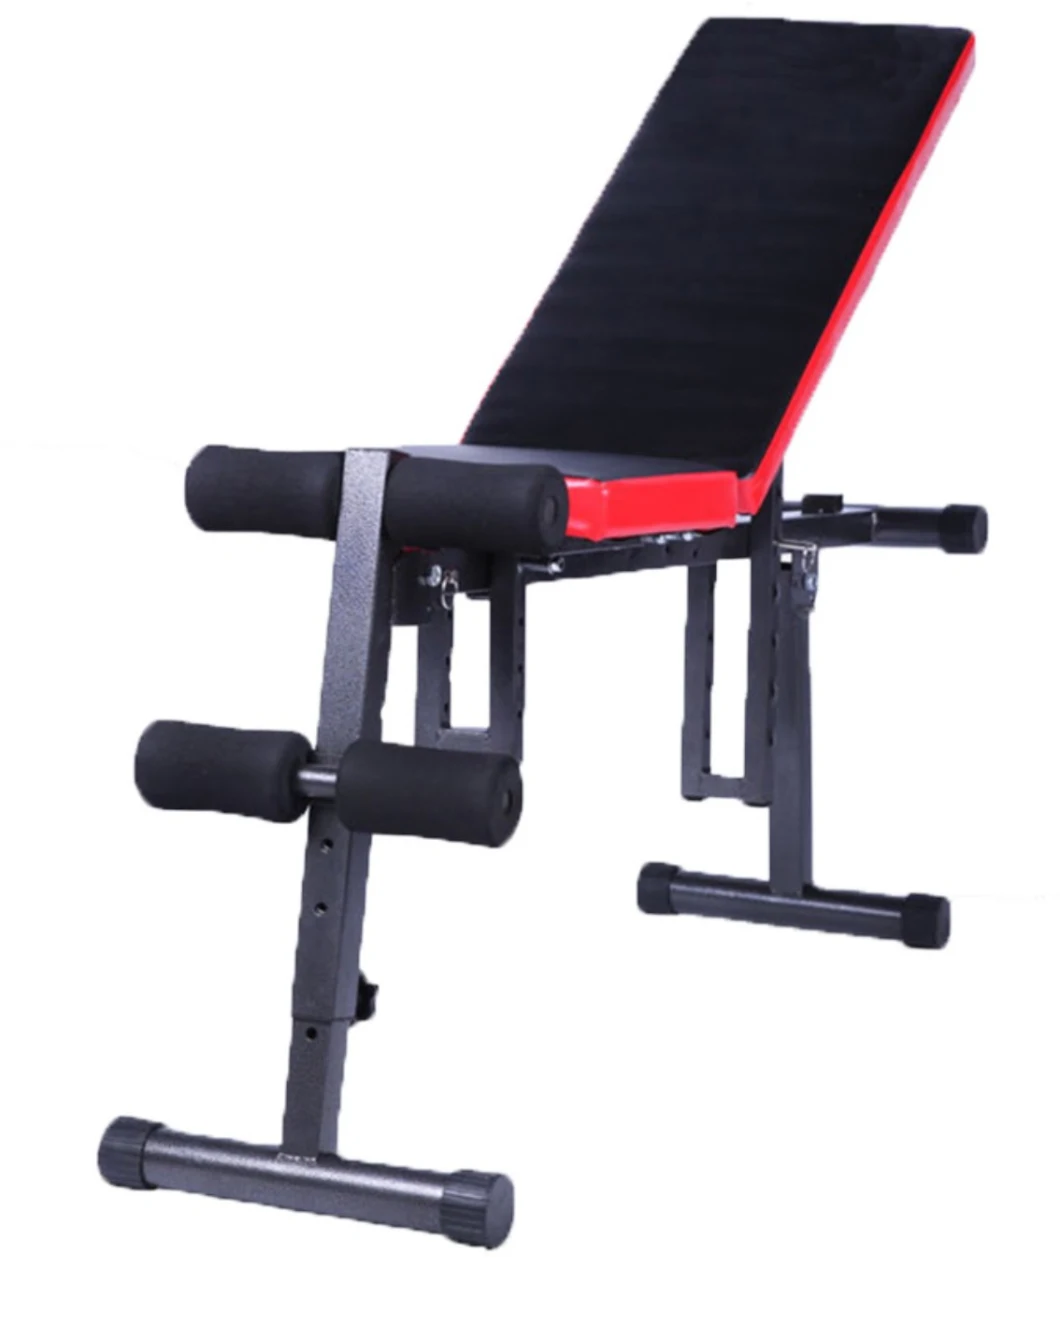 Fitness Club Gym Sit up Exercise Equipment Multi Adjustable Bench